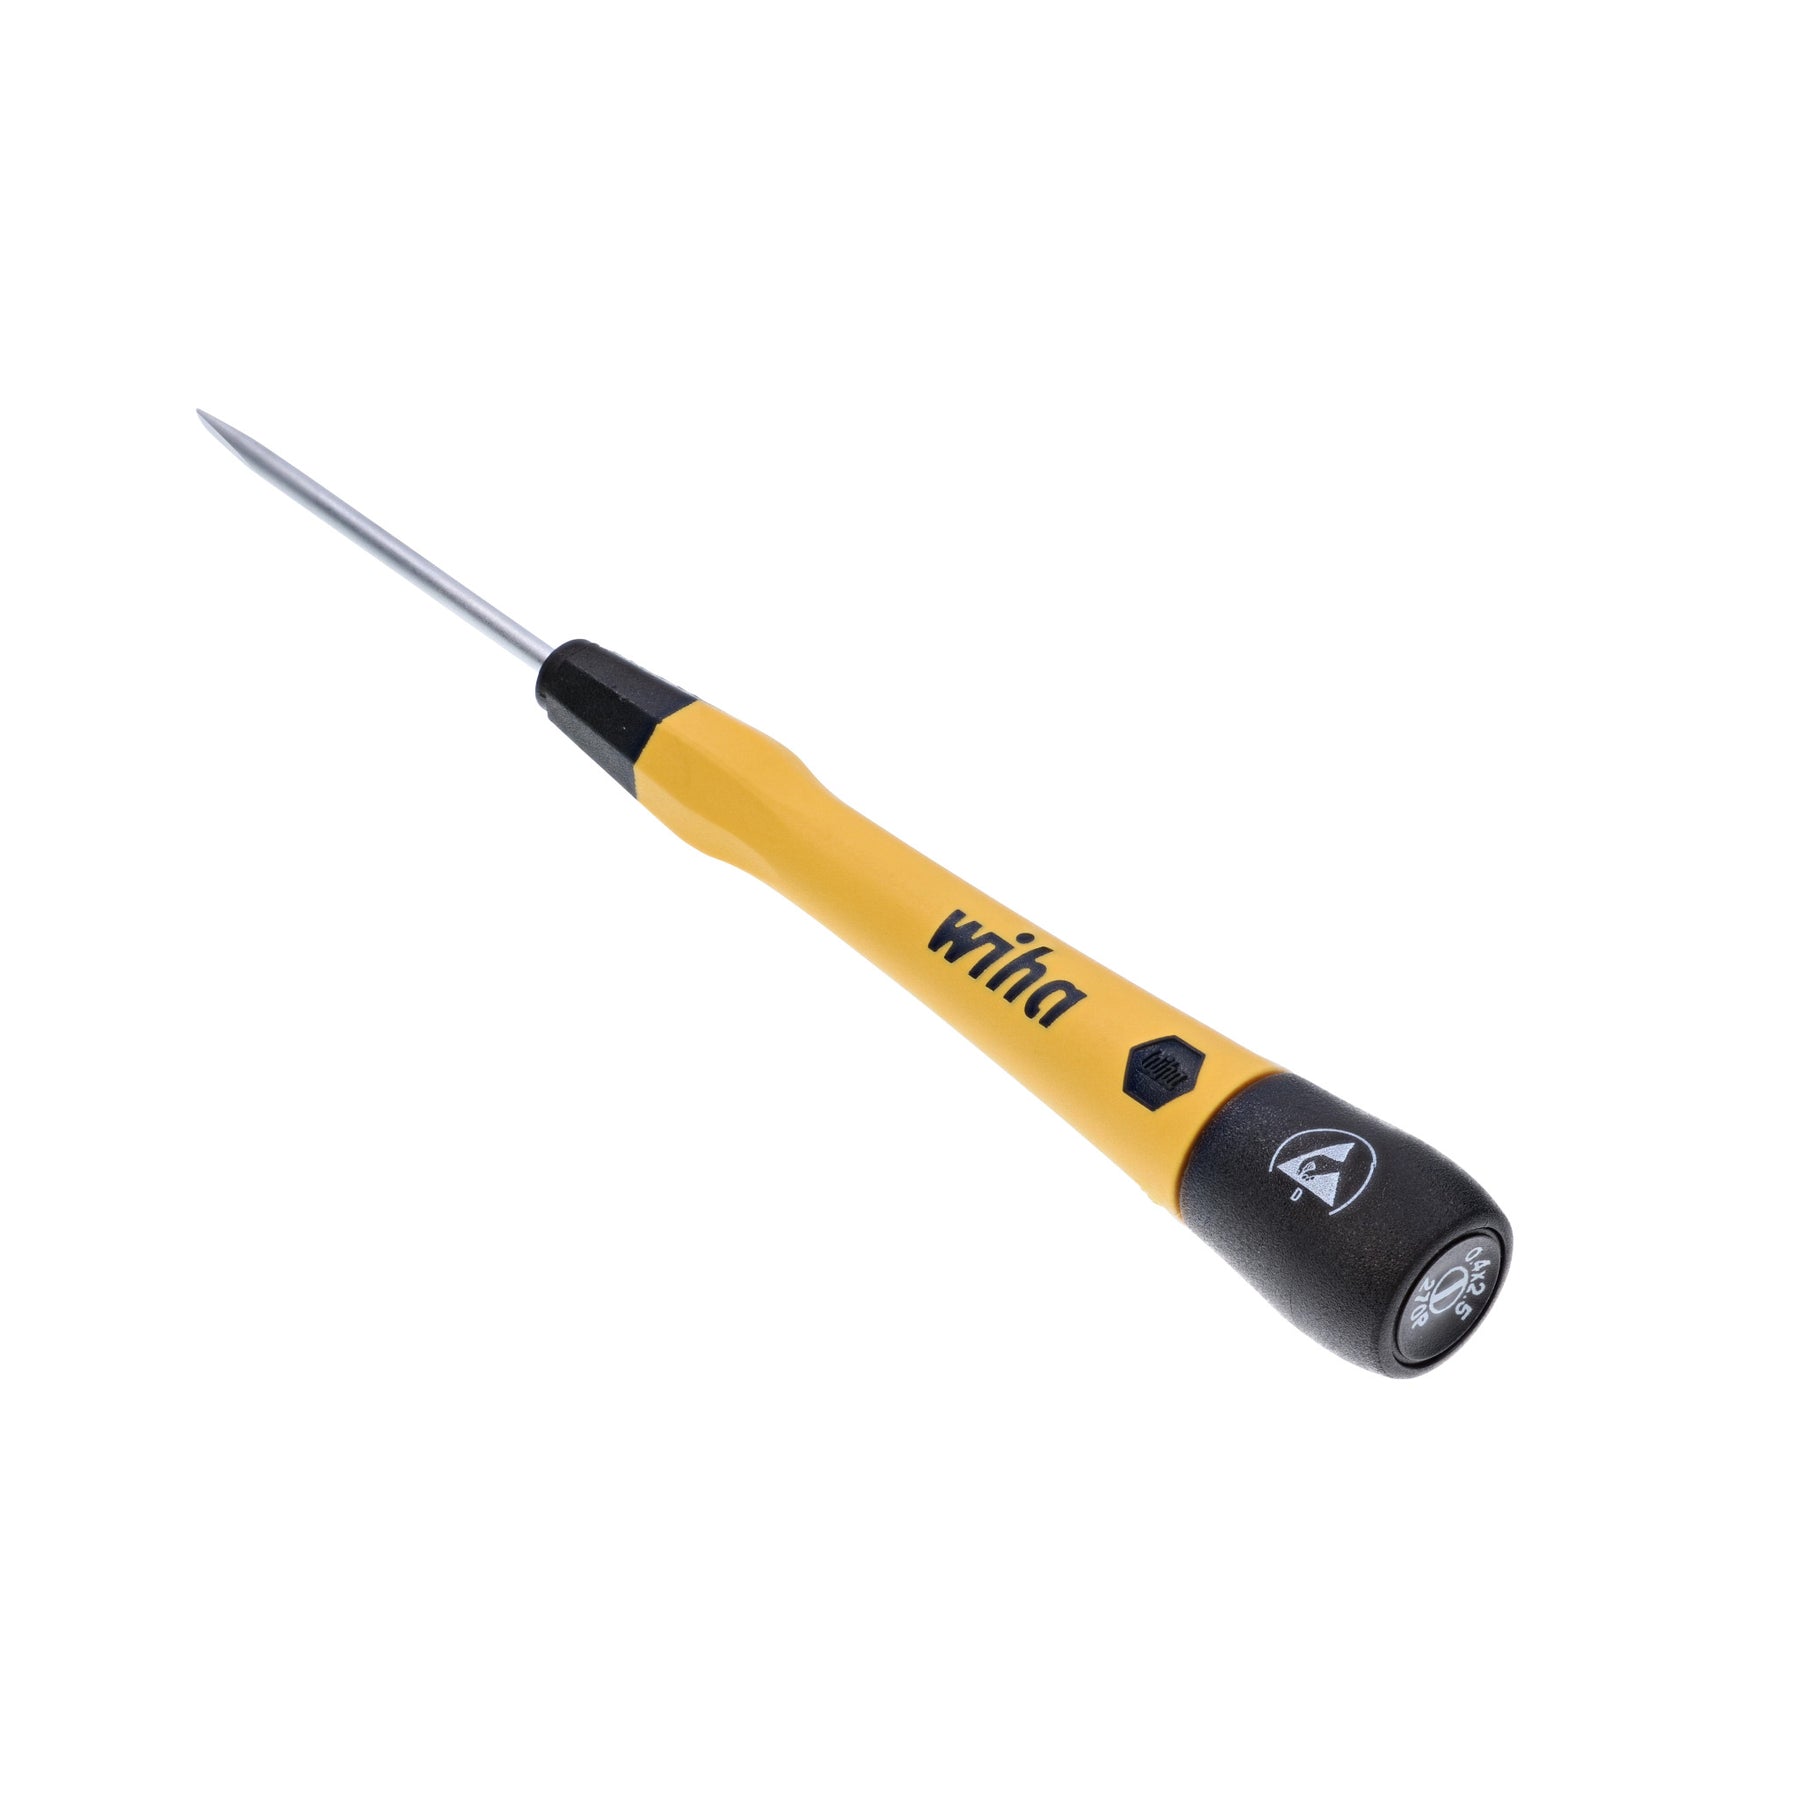 ESD Safe PicoFinish Precision Screwdriver - Slotted 2.5mm x 50mm